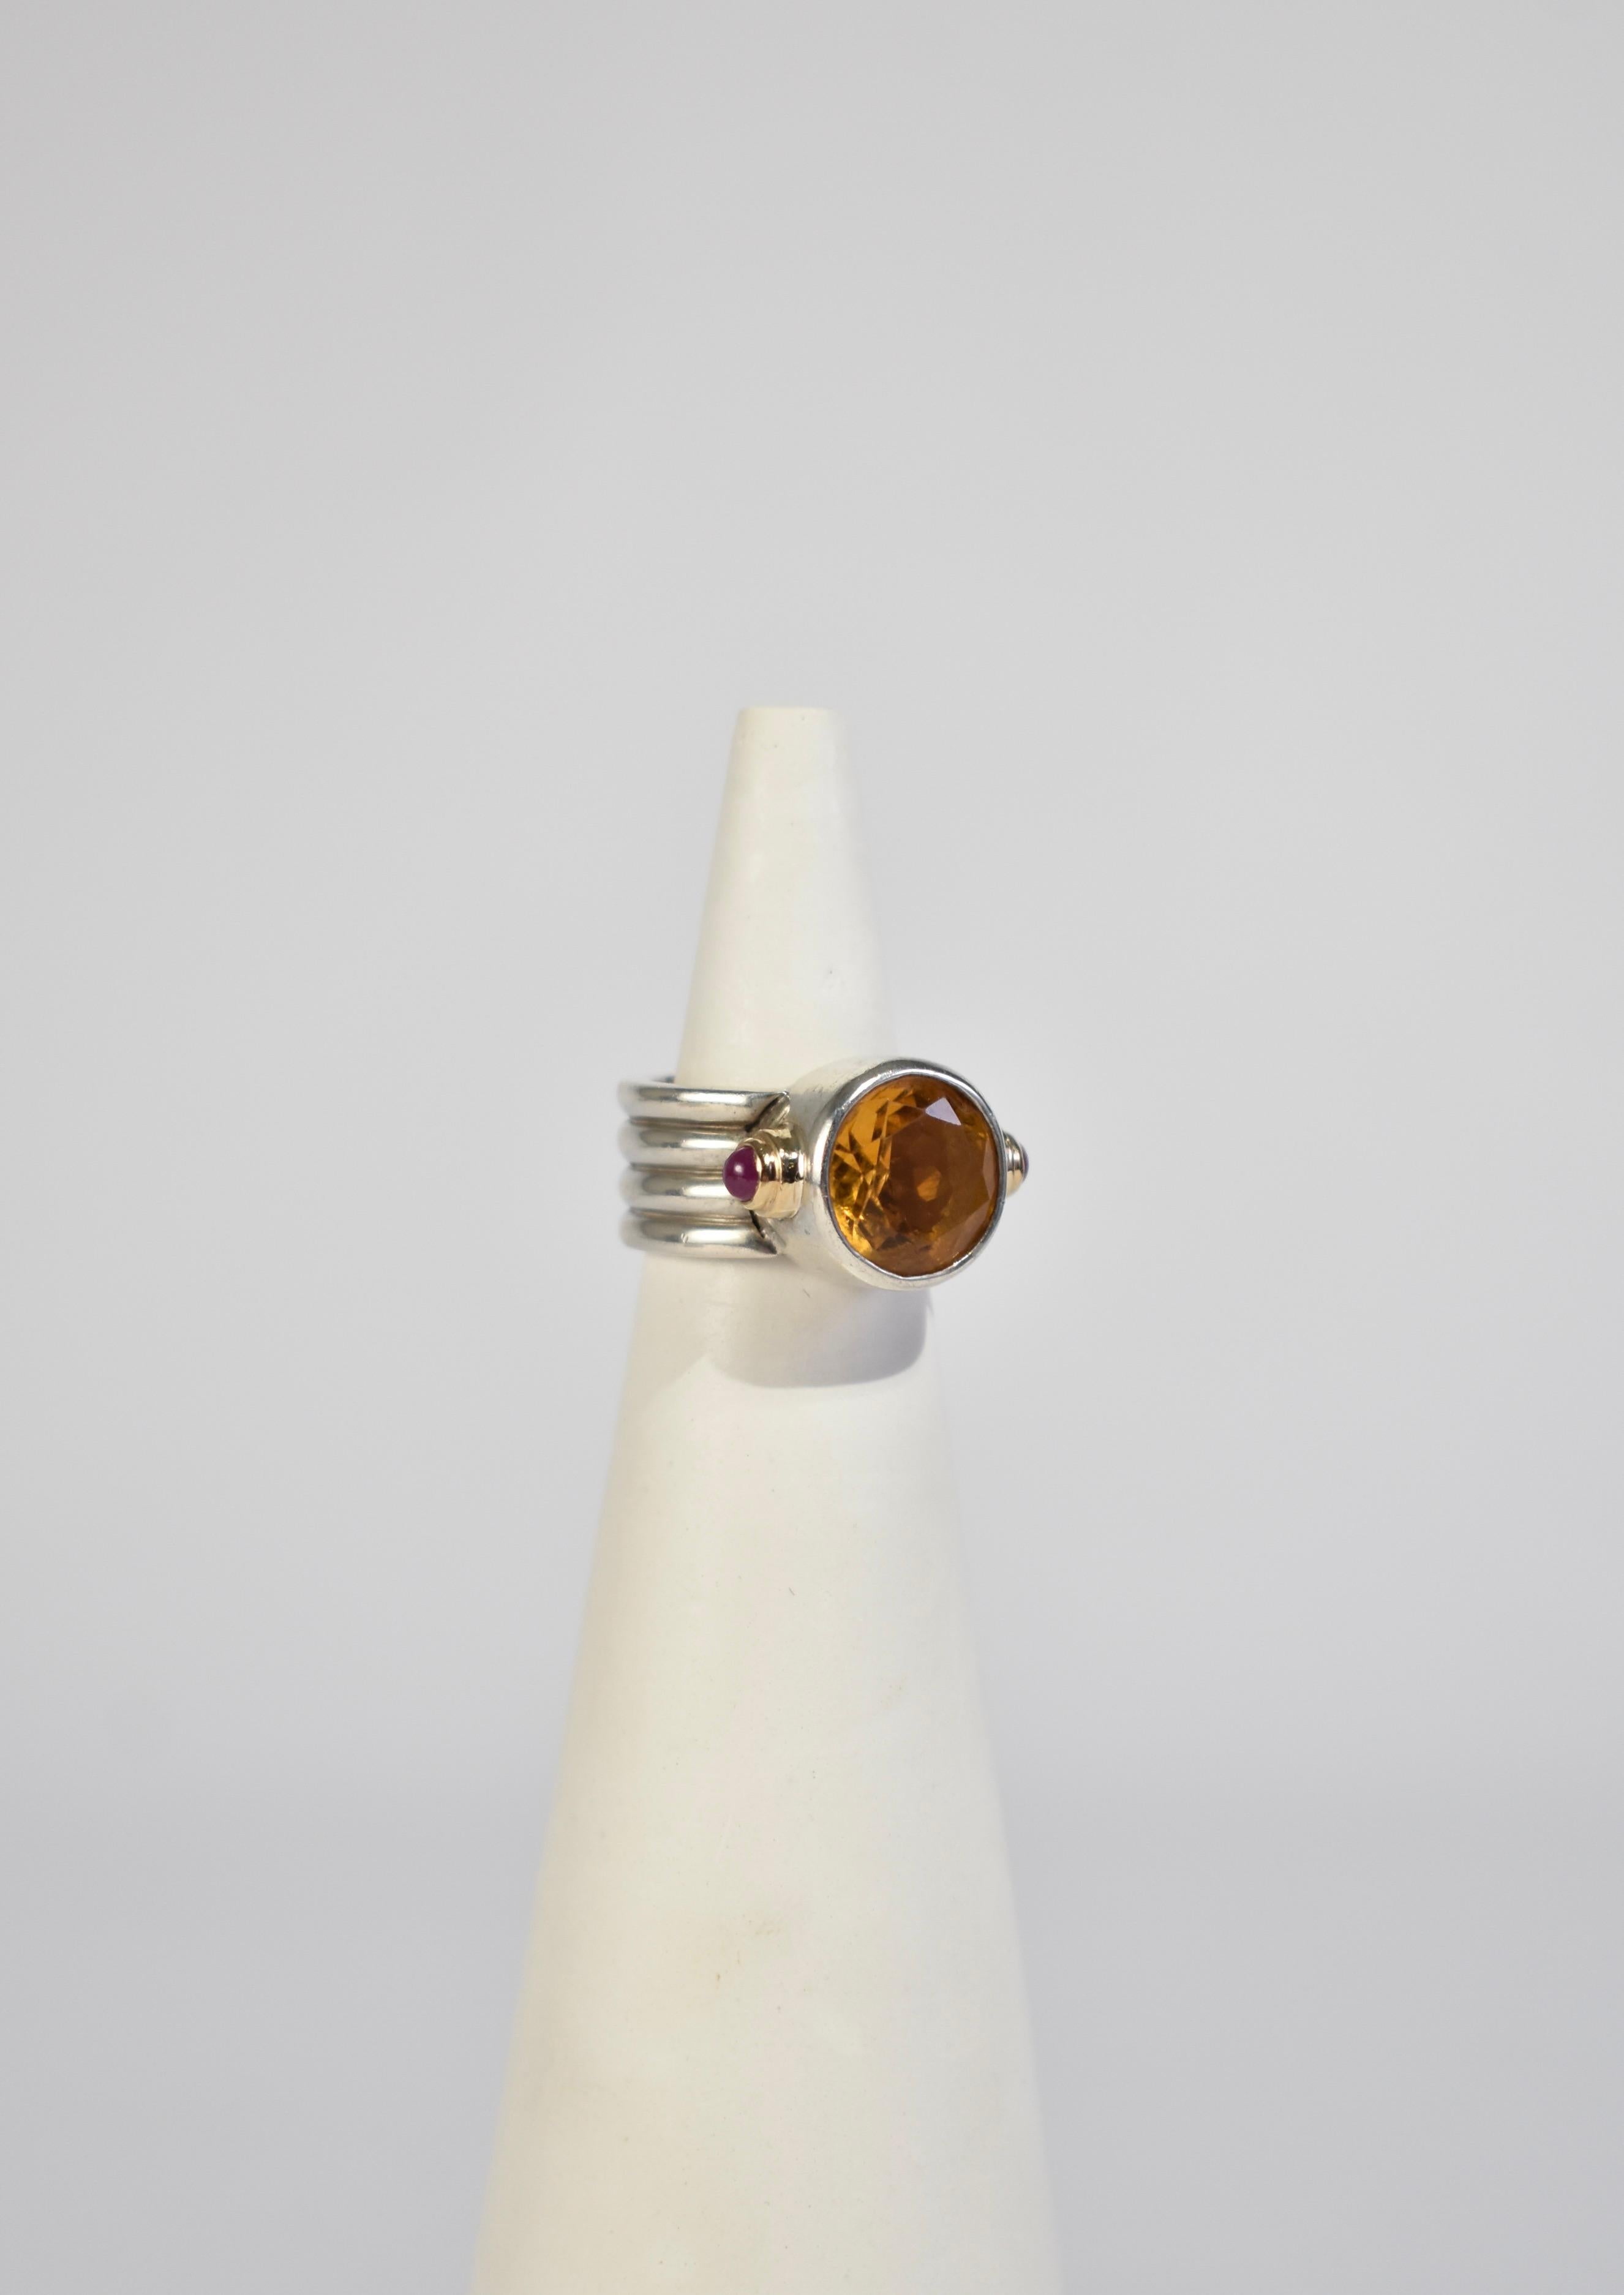 Beautiful vintage sterling ribbed ring with a faceted citrine stone, petite rubies, and gold detail. Stamped sterling.

Material: Sterling silver, 14k gold, citrine, ruby.